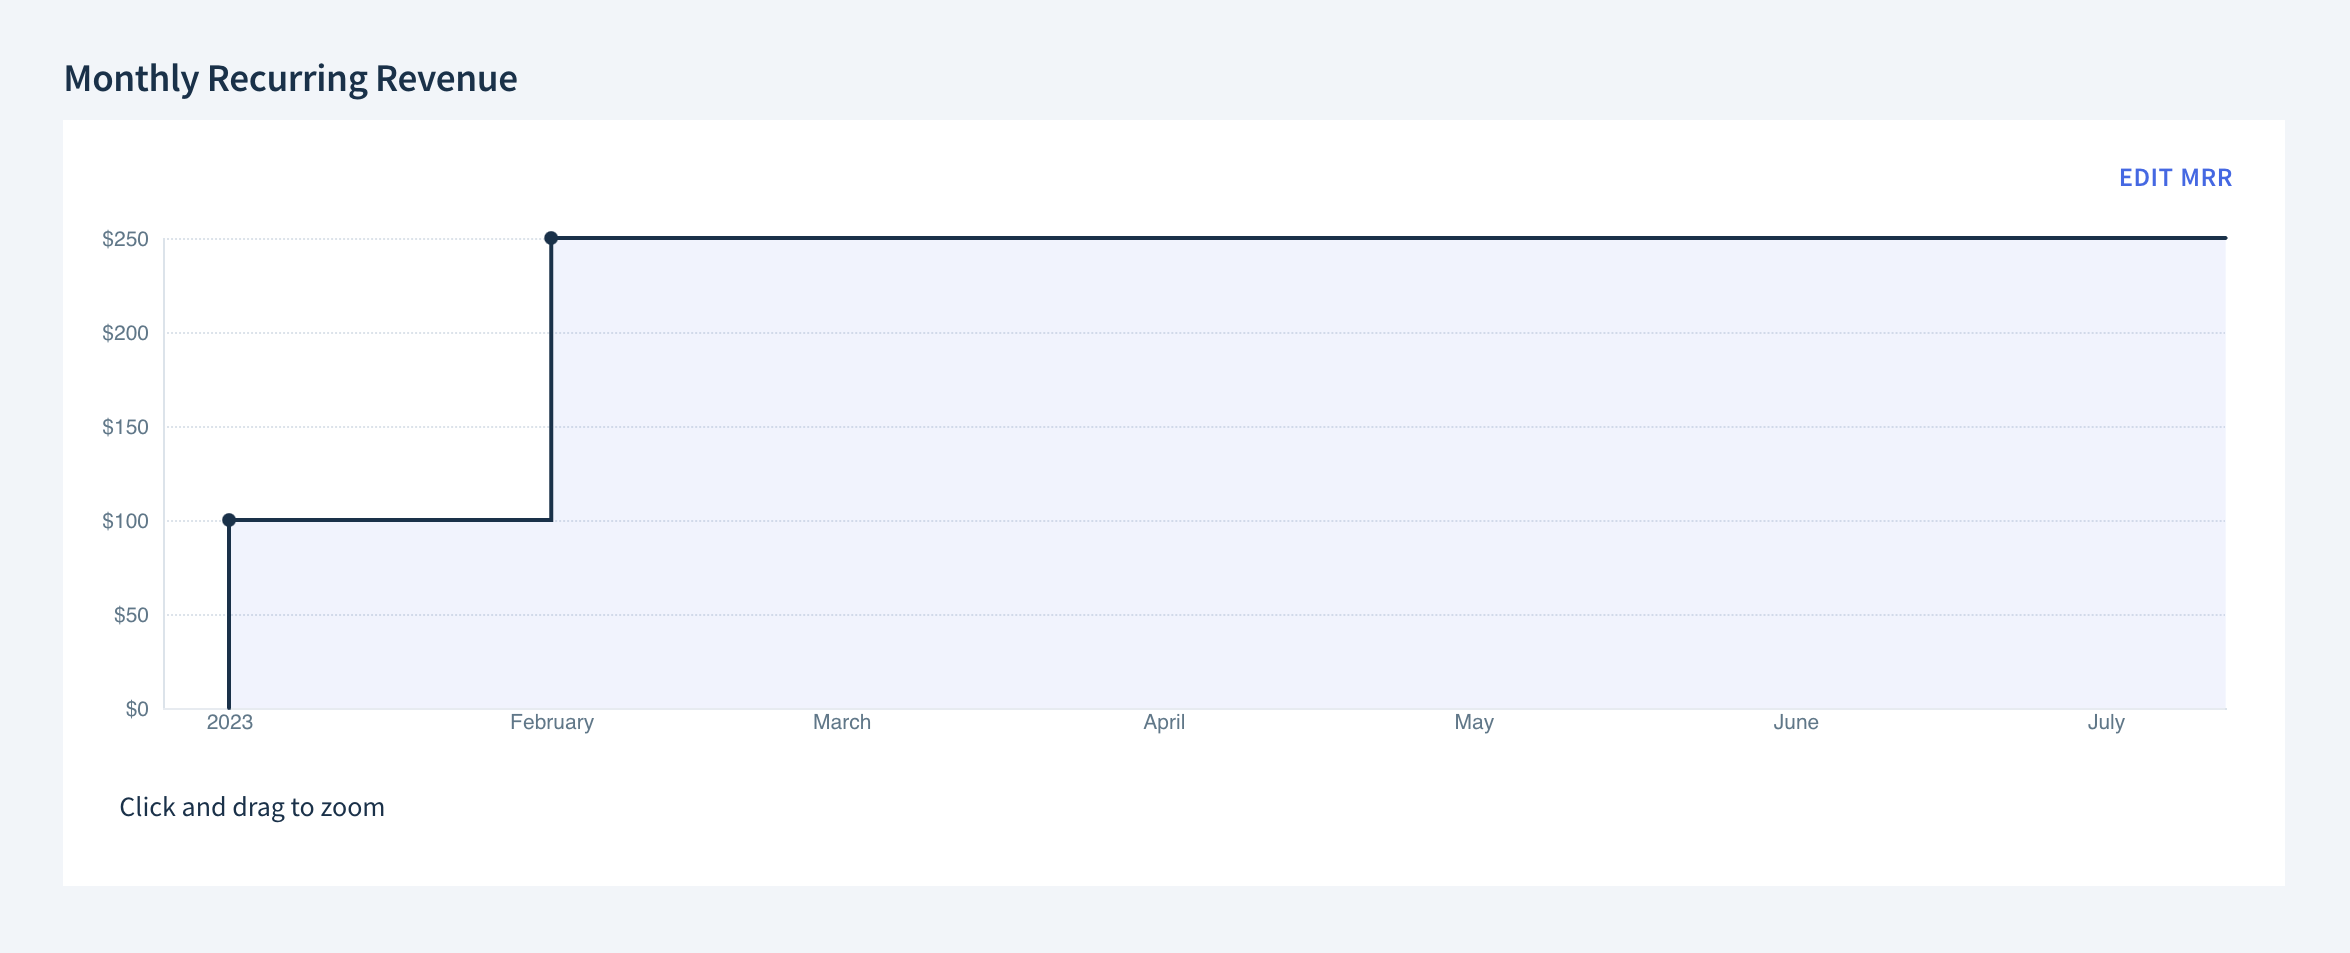 Screenshot of the Monthly Recurring Revenue chart. At the start of January 2023, MRR increases from 0 to 100 dollars. At the start of February 2023, MRR increases to 250 dollars and remains at this level.